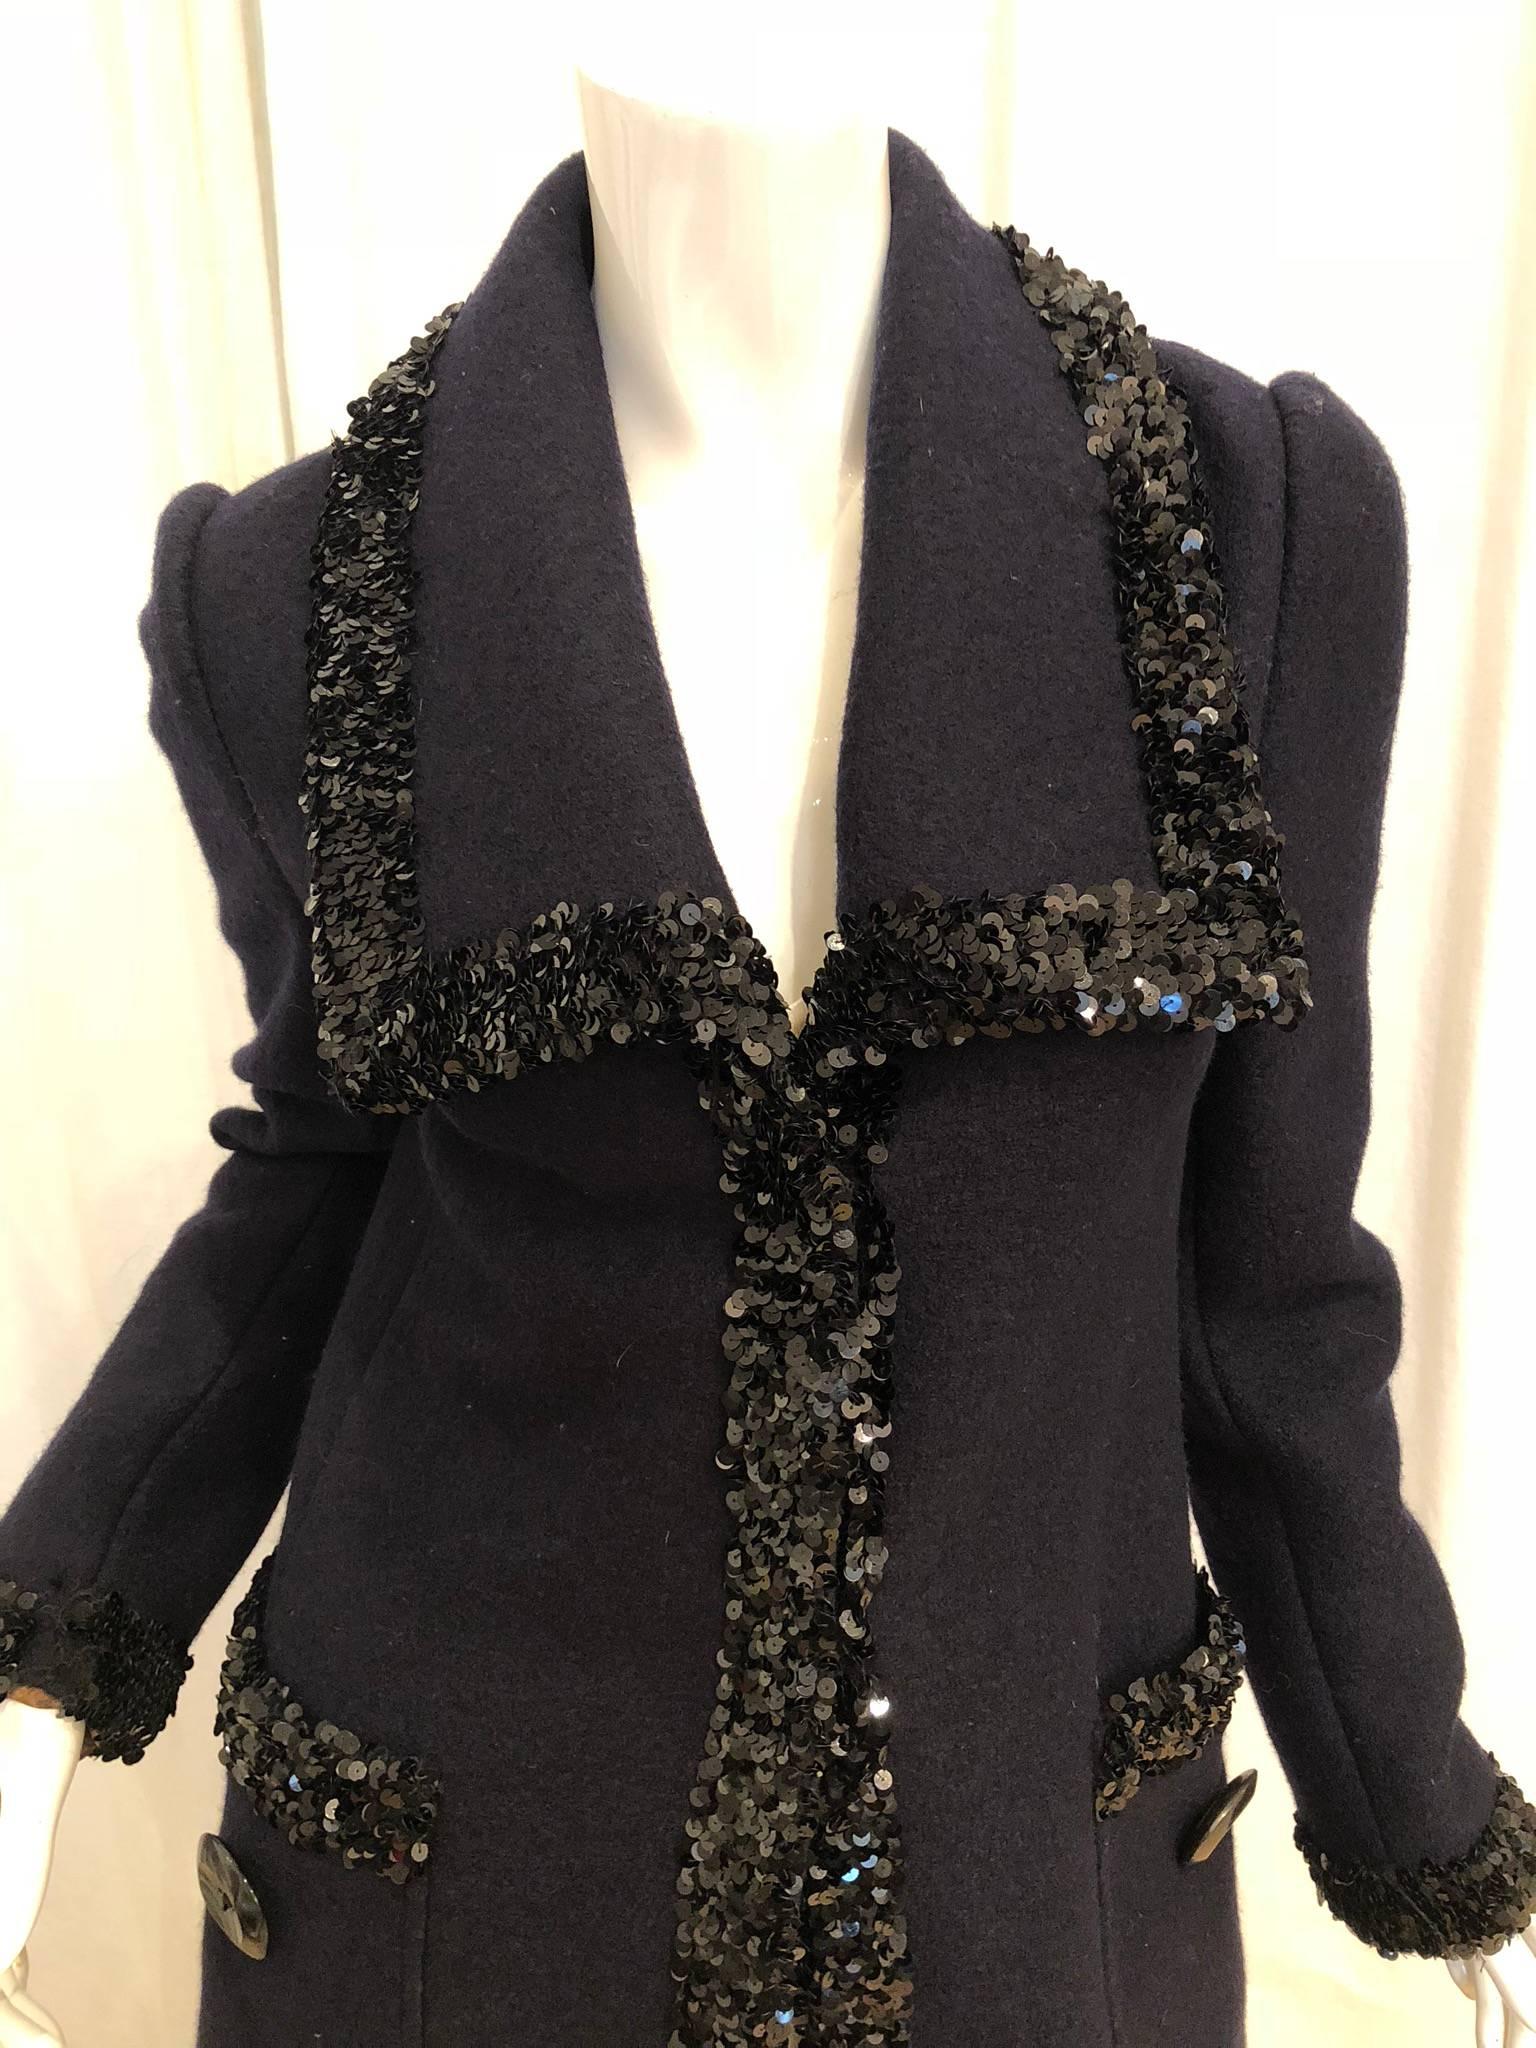 Dolce & Gabbana Black Sequin Trim Coat with Two Front Button Pockets.